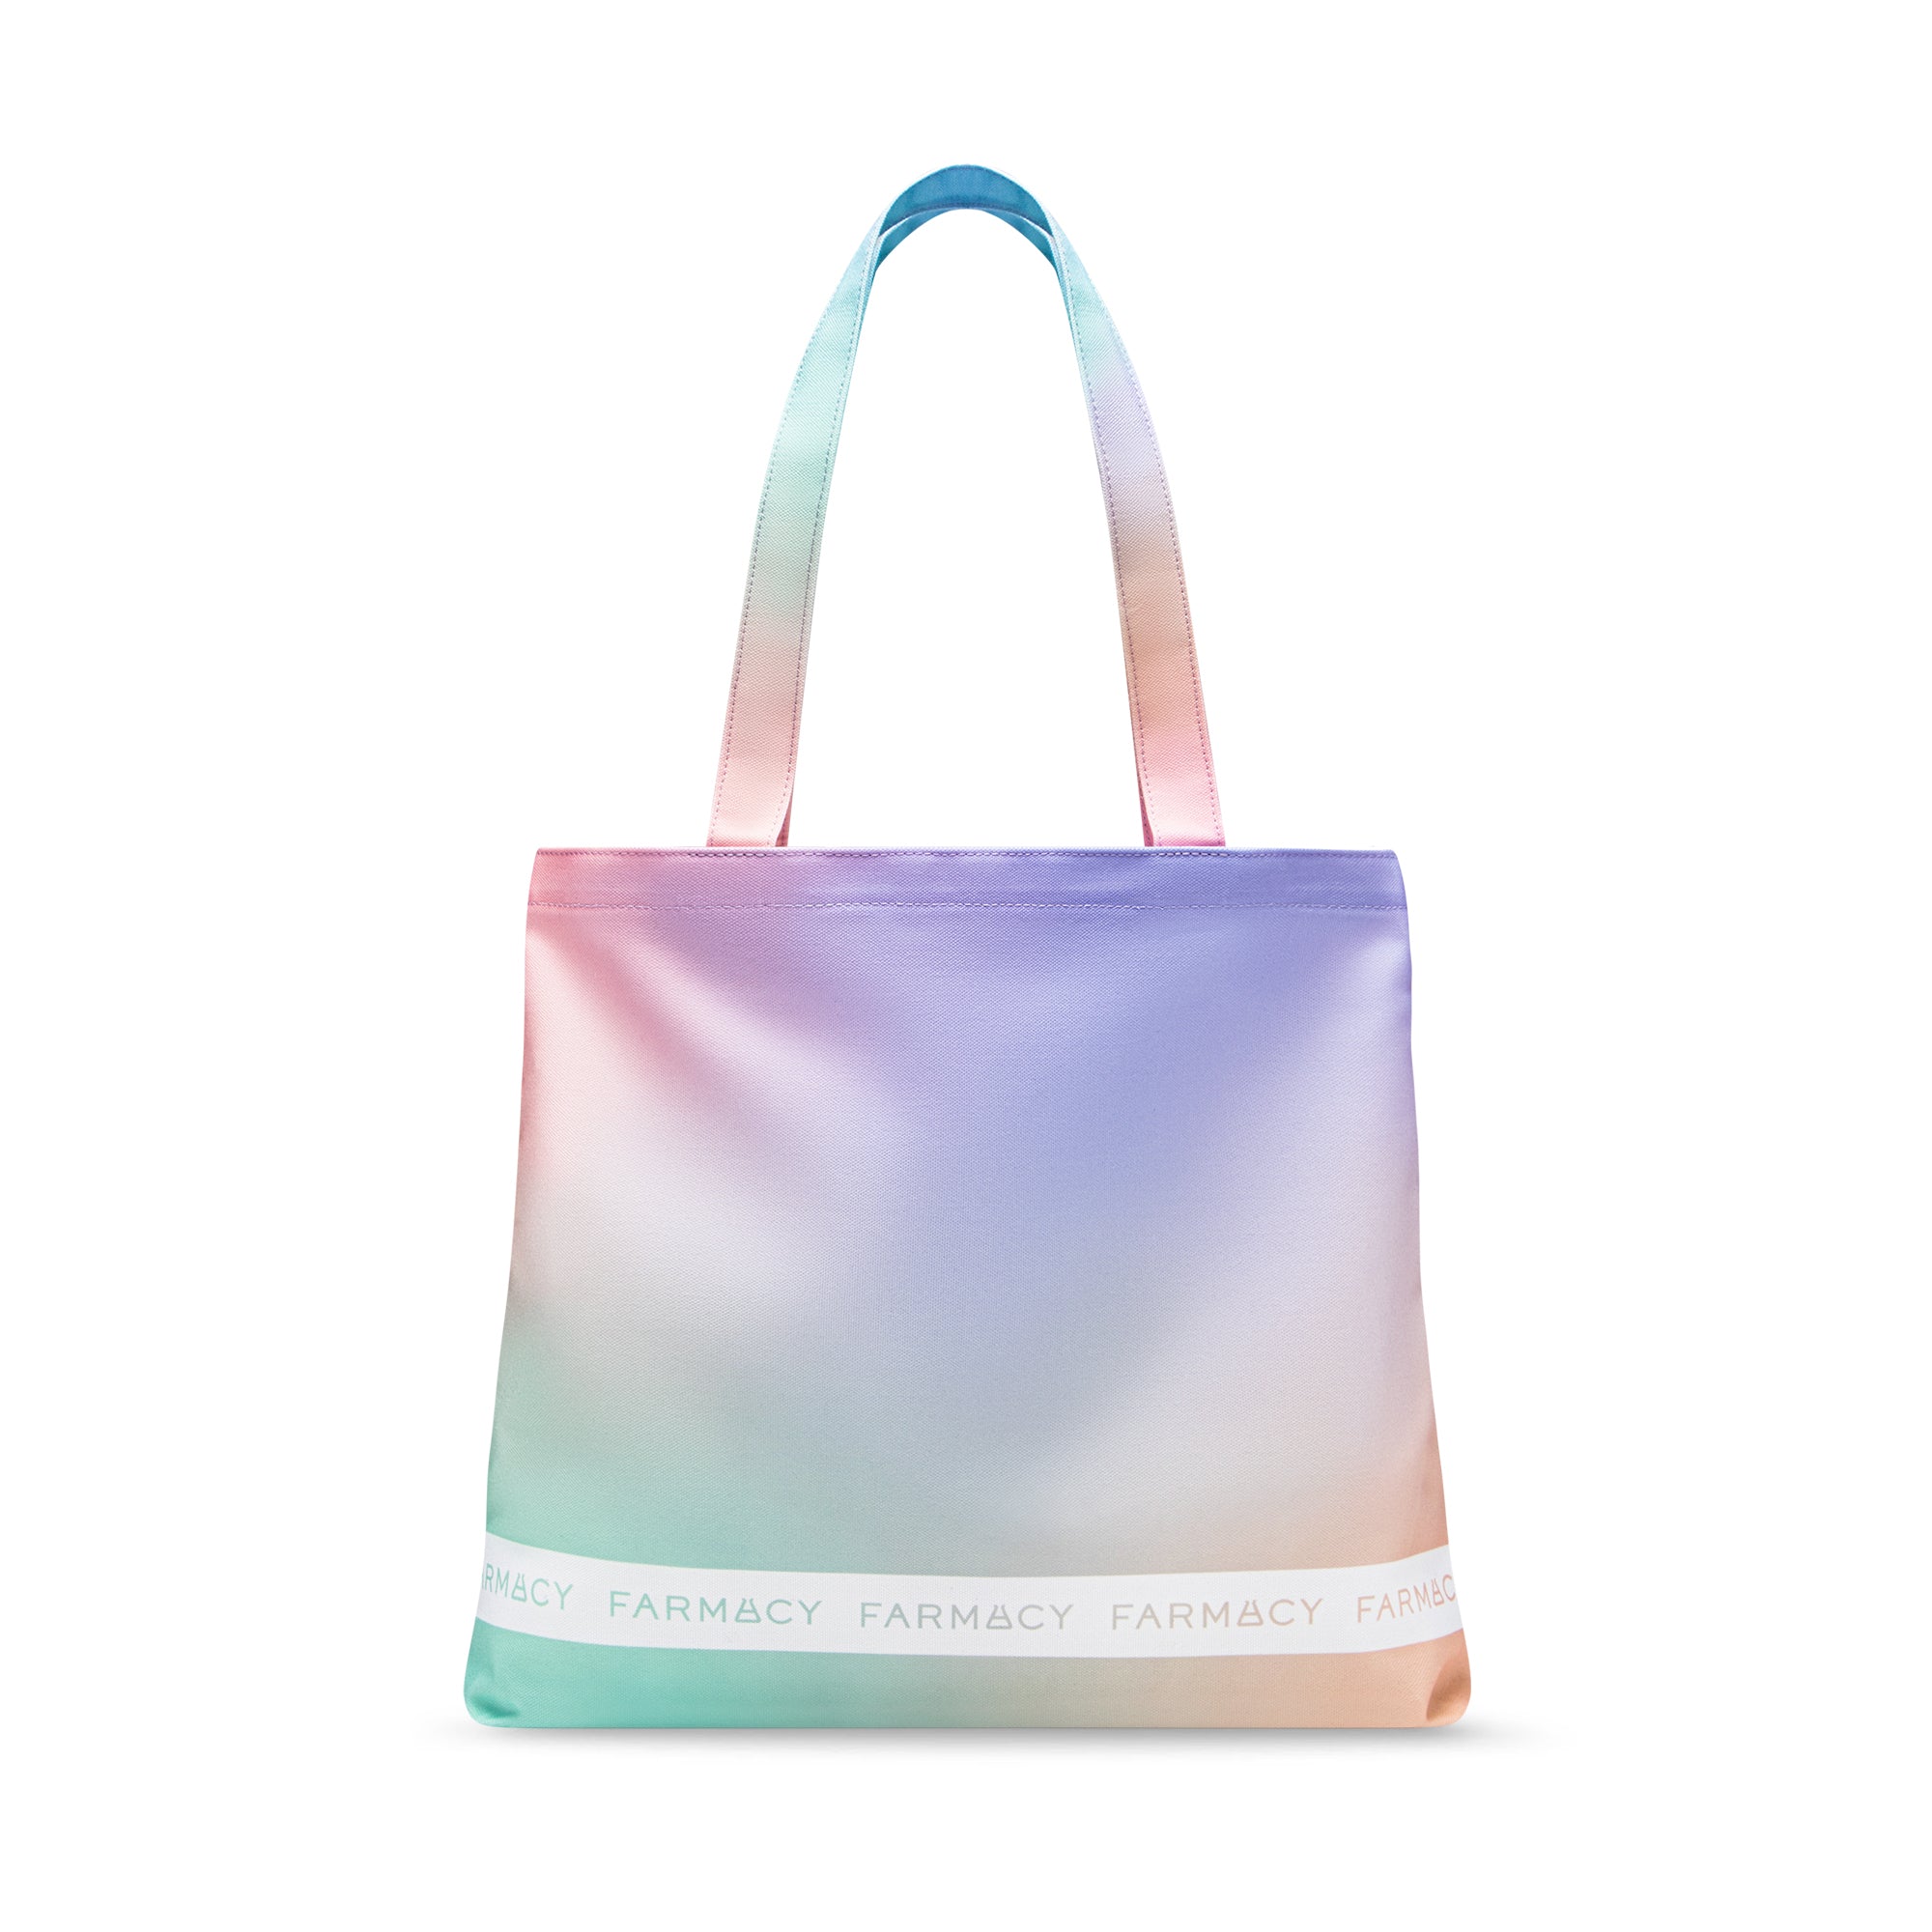 The Everywhere Canvas Tote